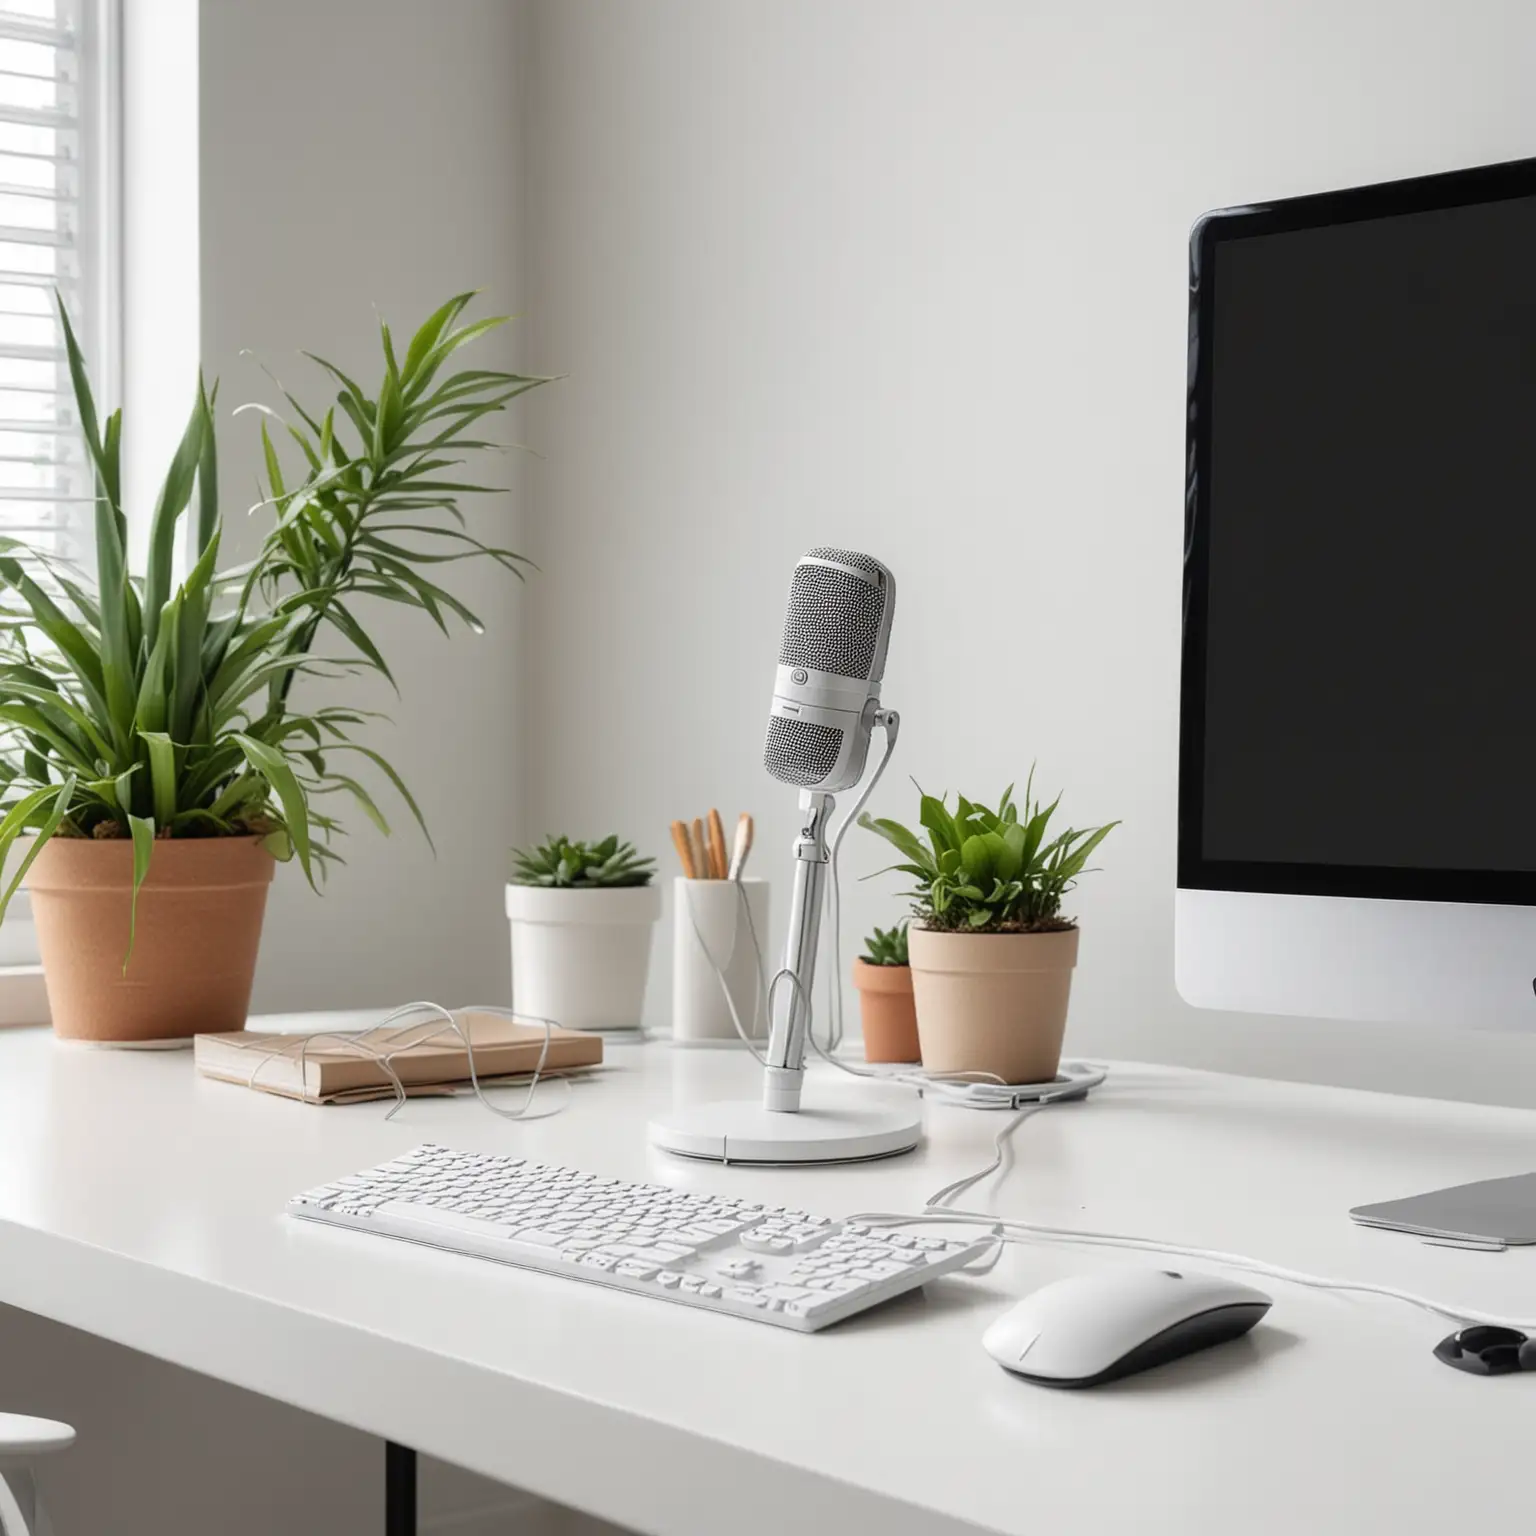 podcast mic on desk in modern white office with plants and desktop computer
